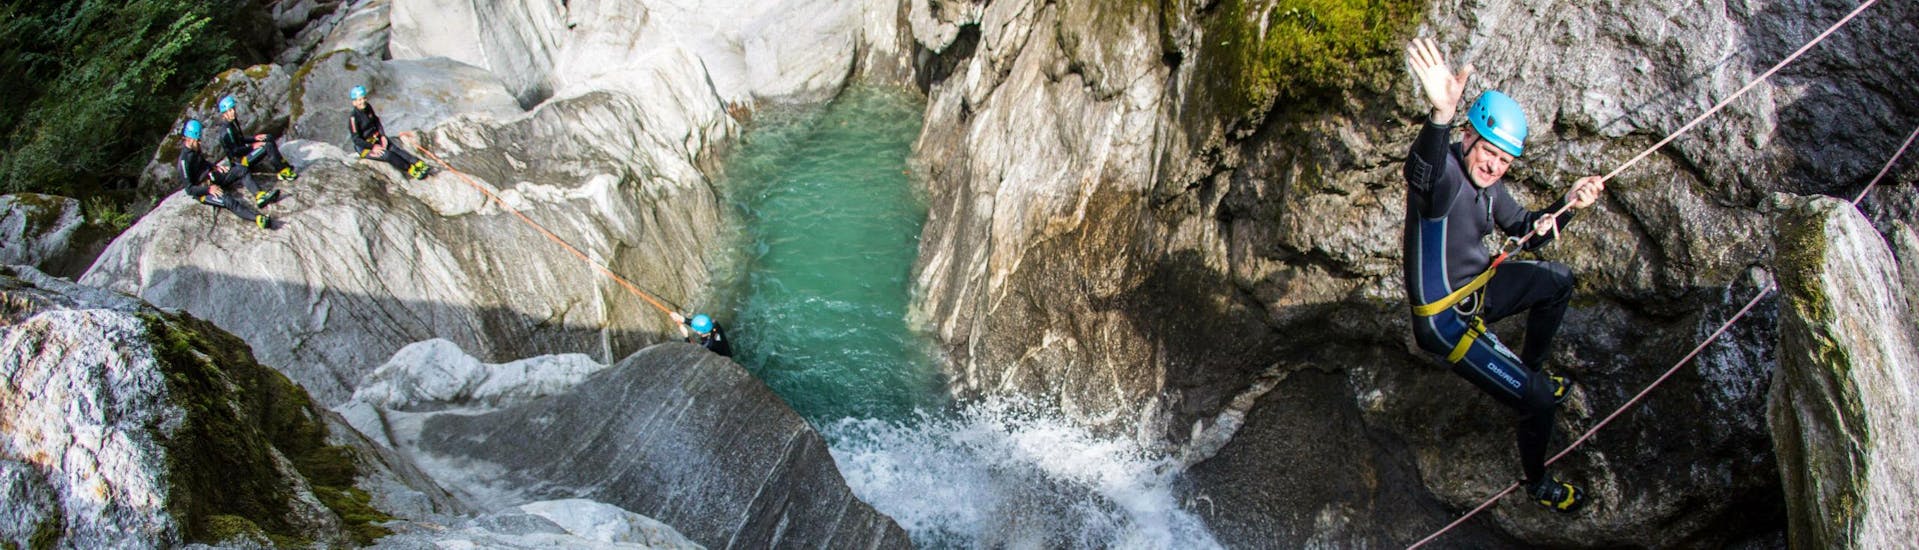 Canyoning in Zemmschlucht - Blue Lagoon Tour.